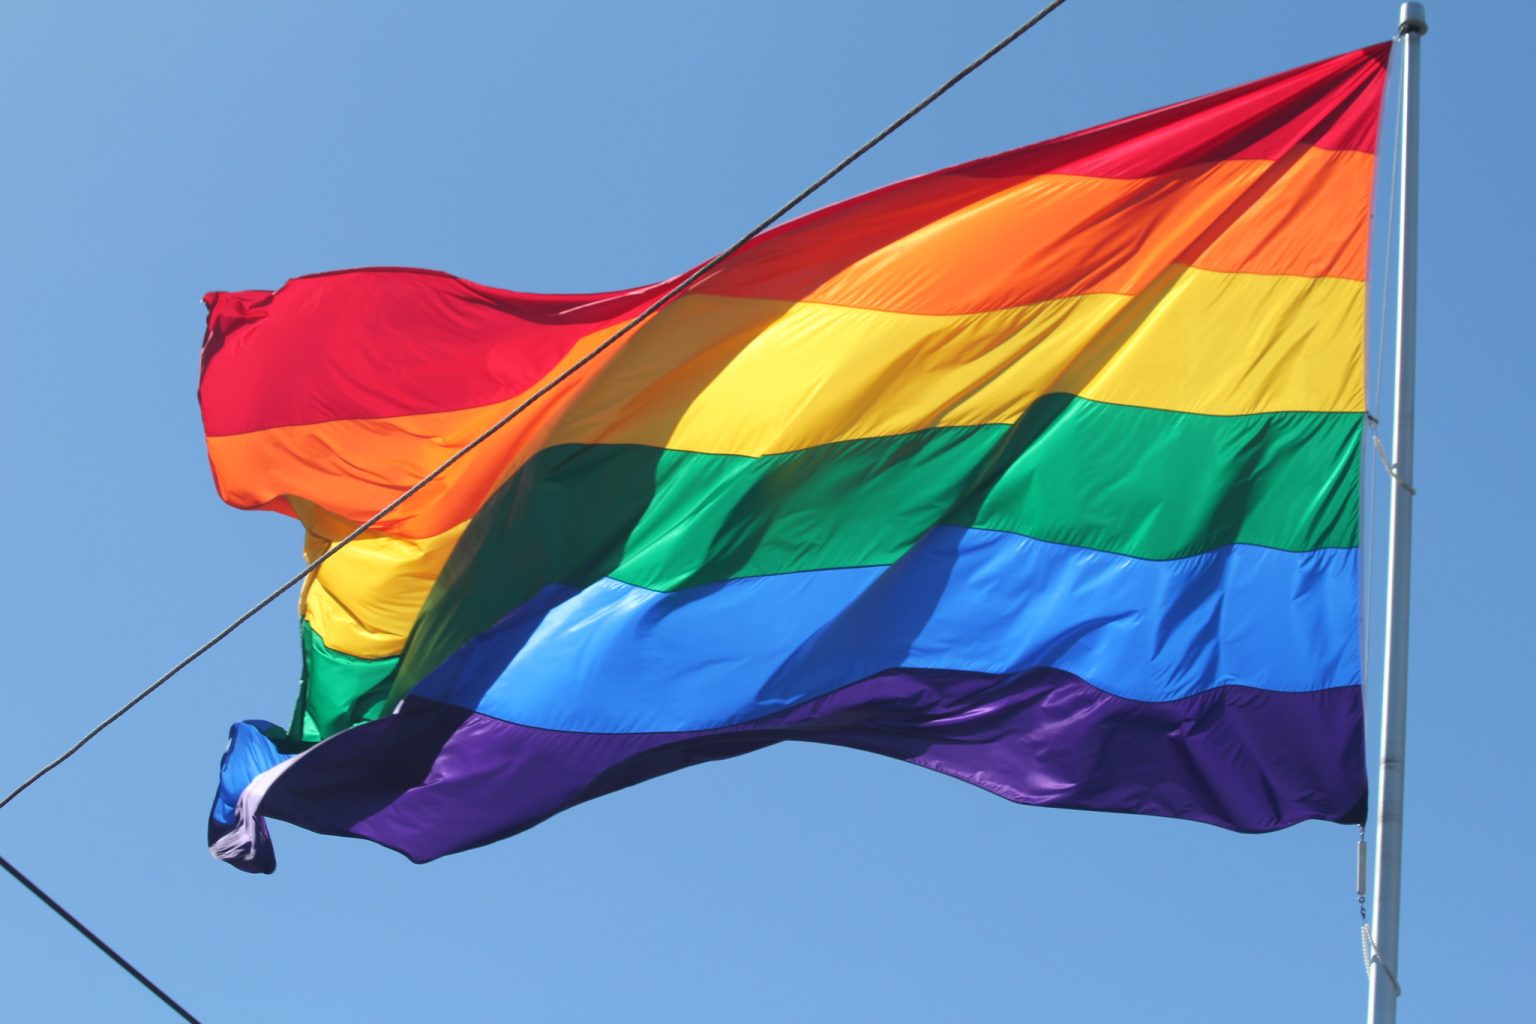 Toms River to Host 3rd Annual LGBT Pride Festival June 13 Toms River